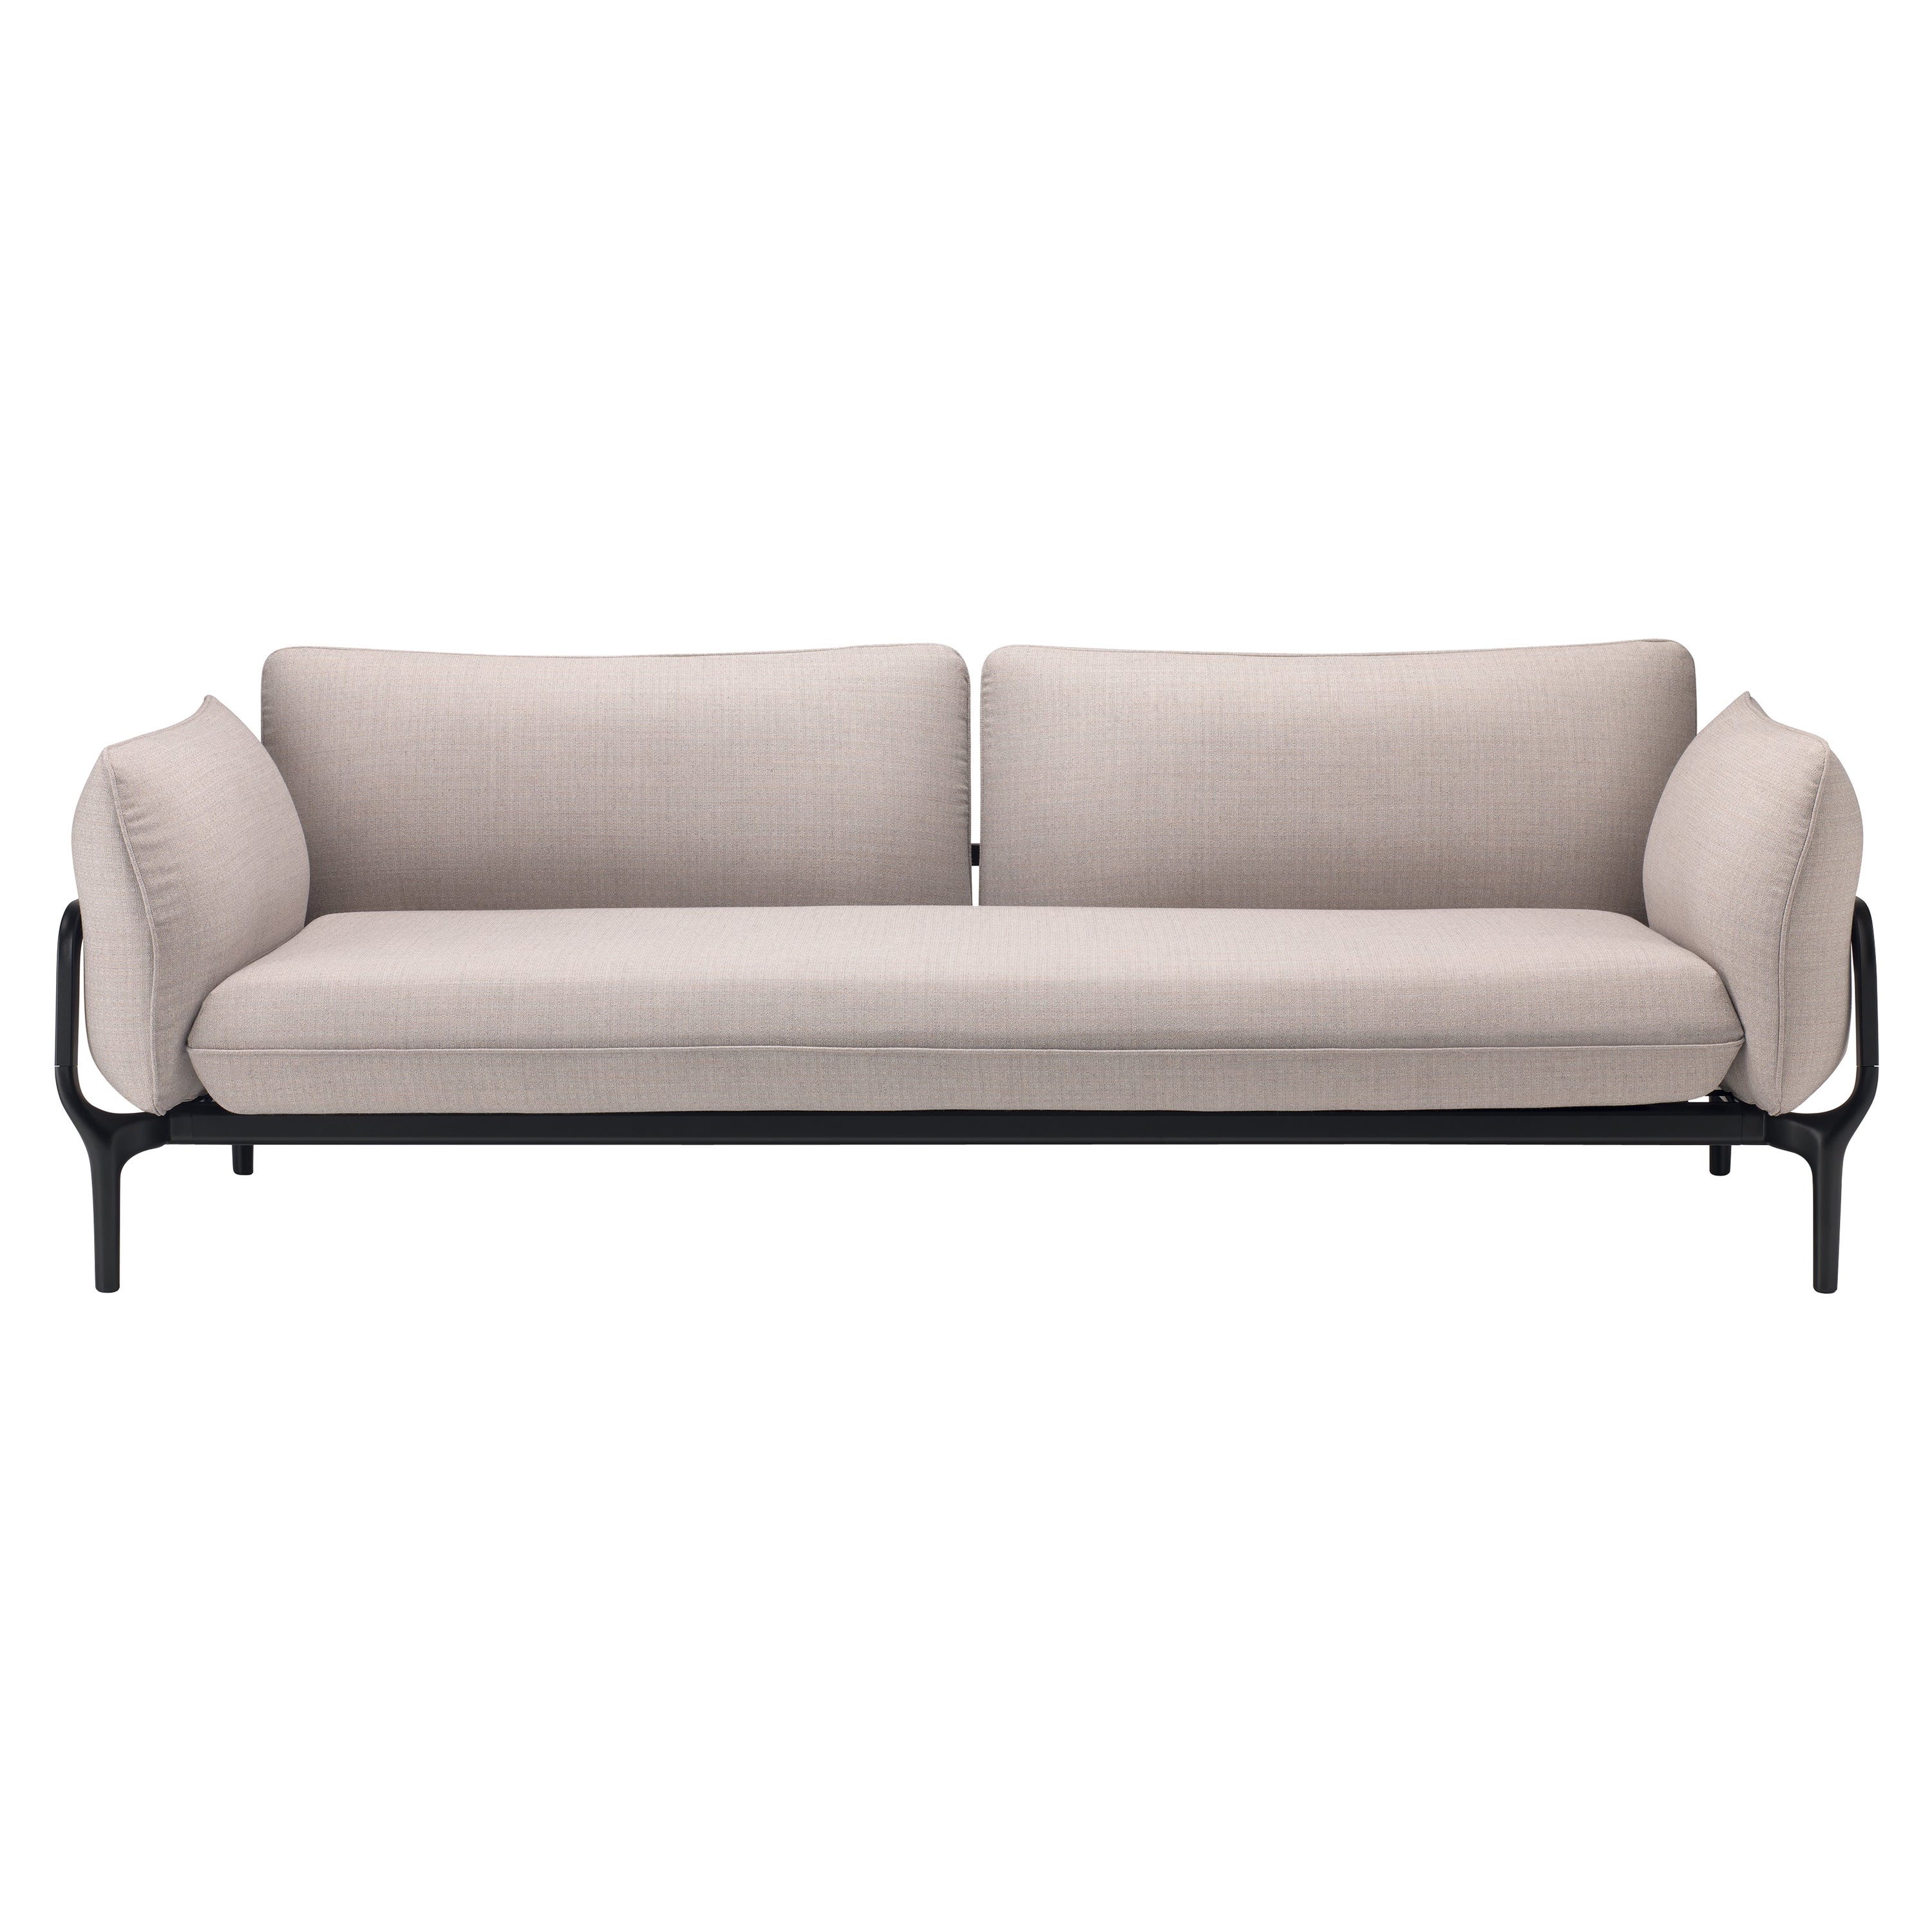 Alias V02 Vina Sofa in Beige Upholstery with Black Lacquered Aluminum Frame For Sale